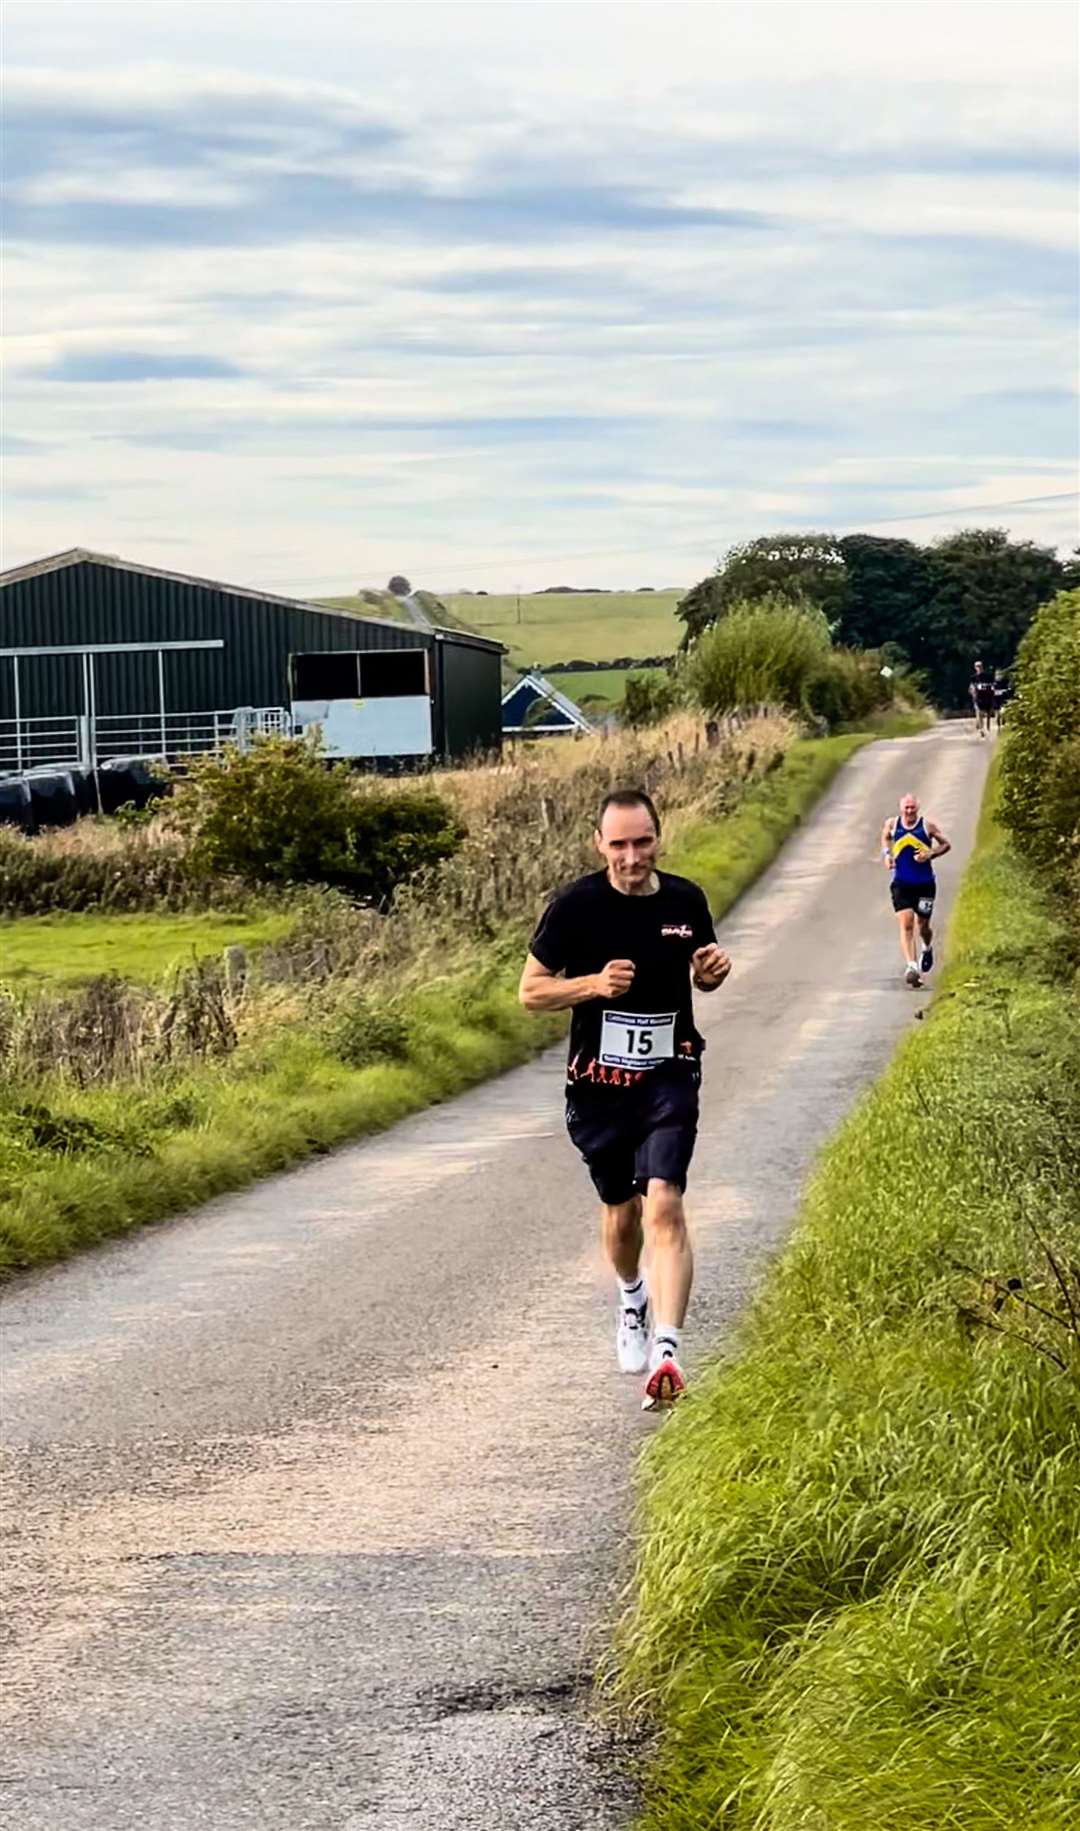 The Caithness Half Marathon is organised by North Highland Harriers and takes place on roads around Watten.